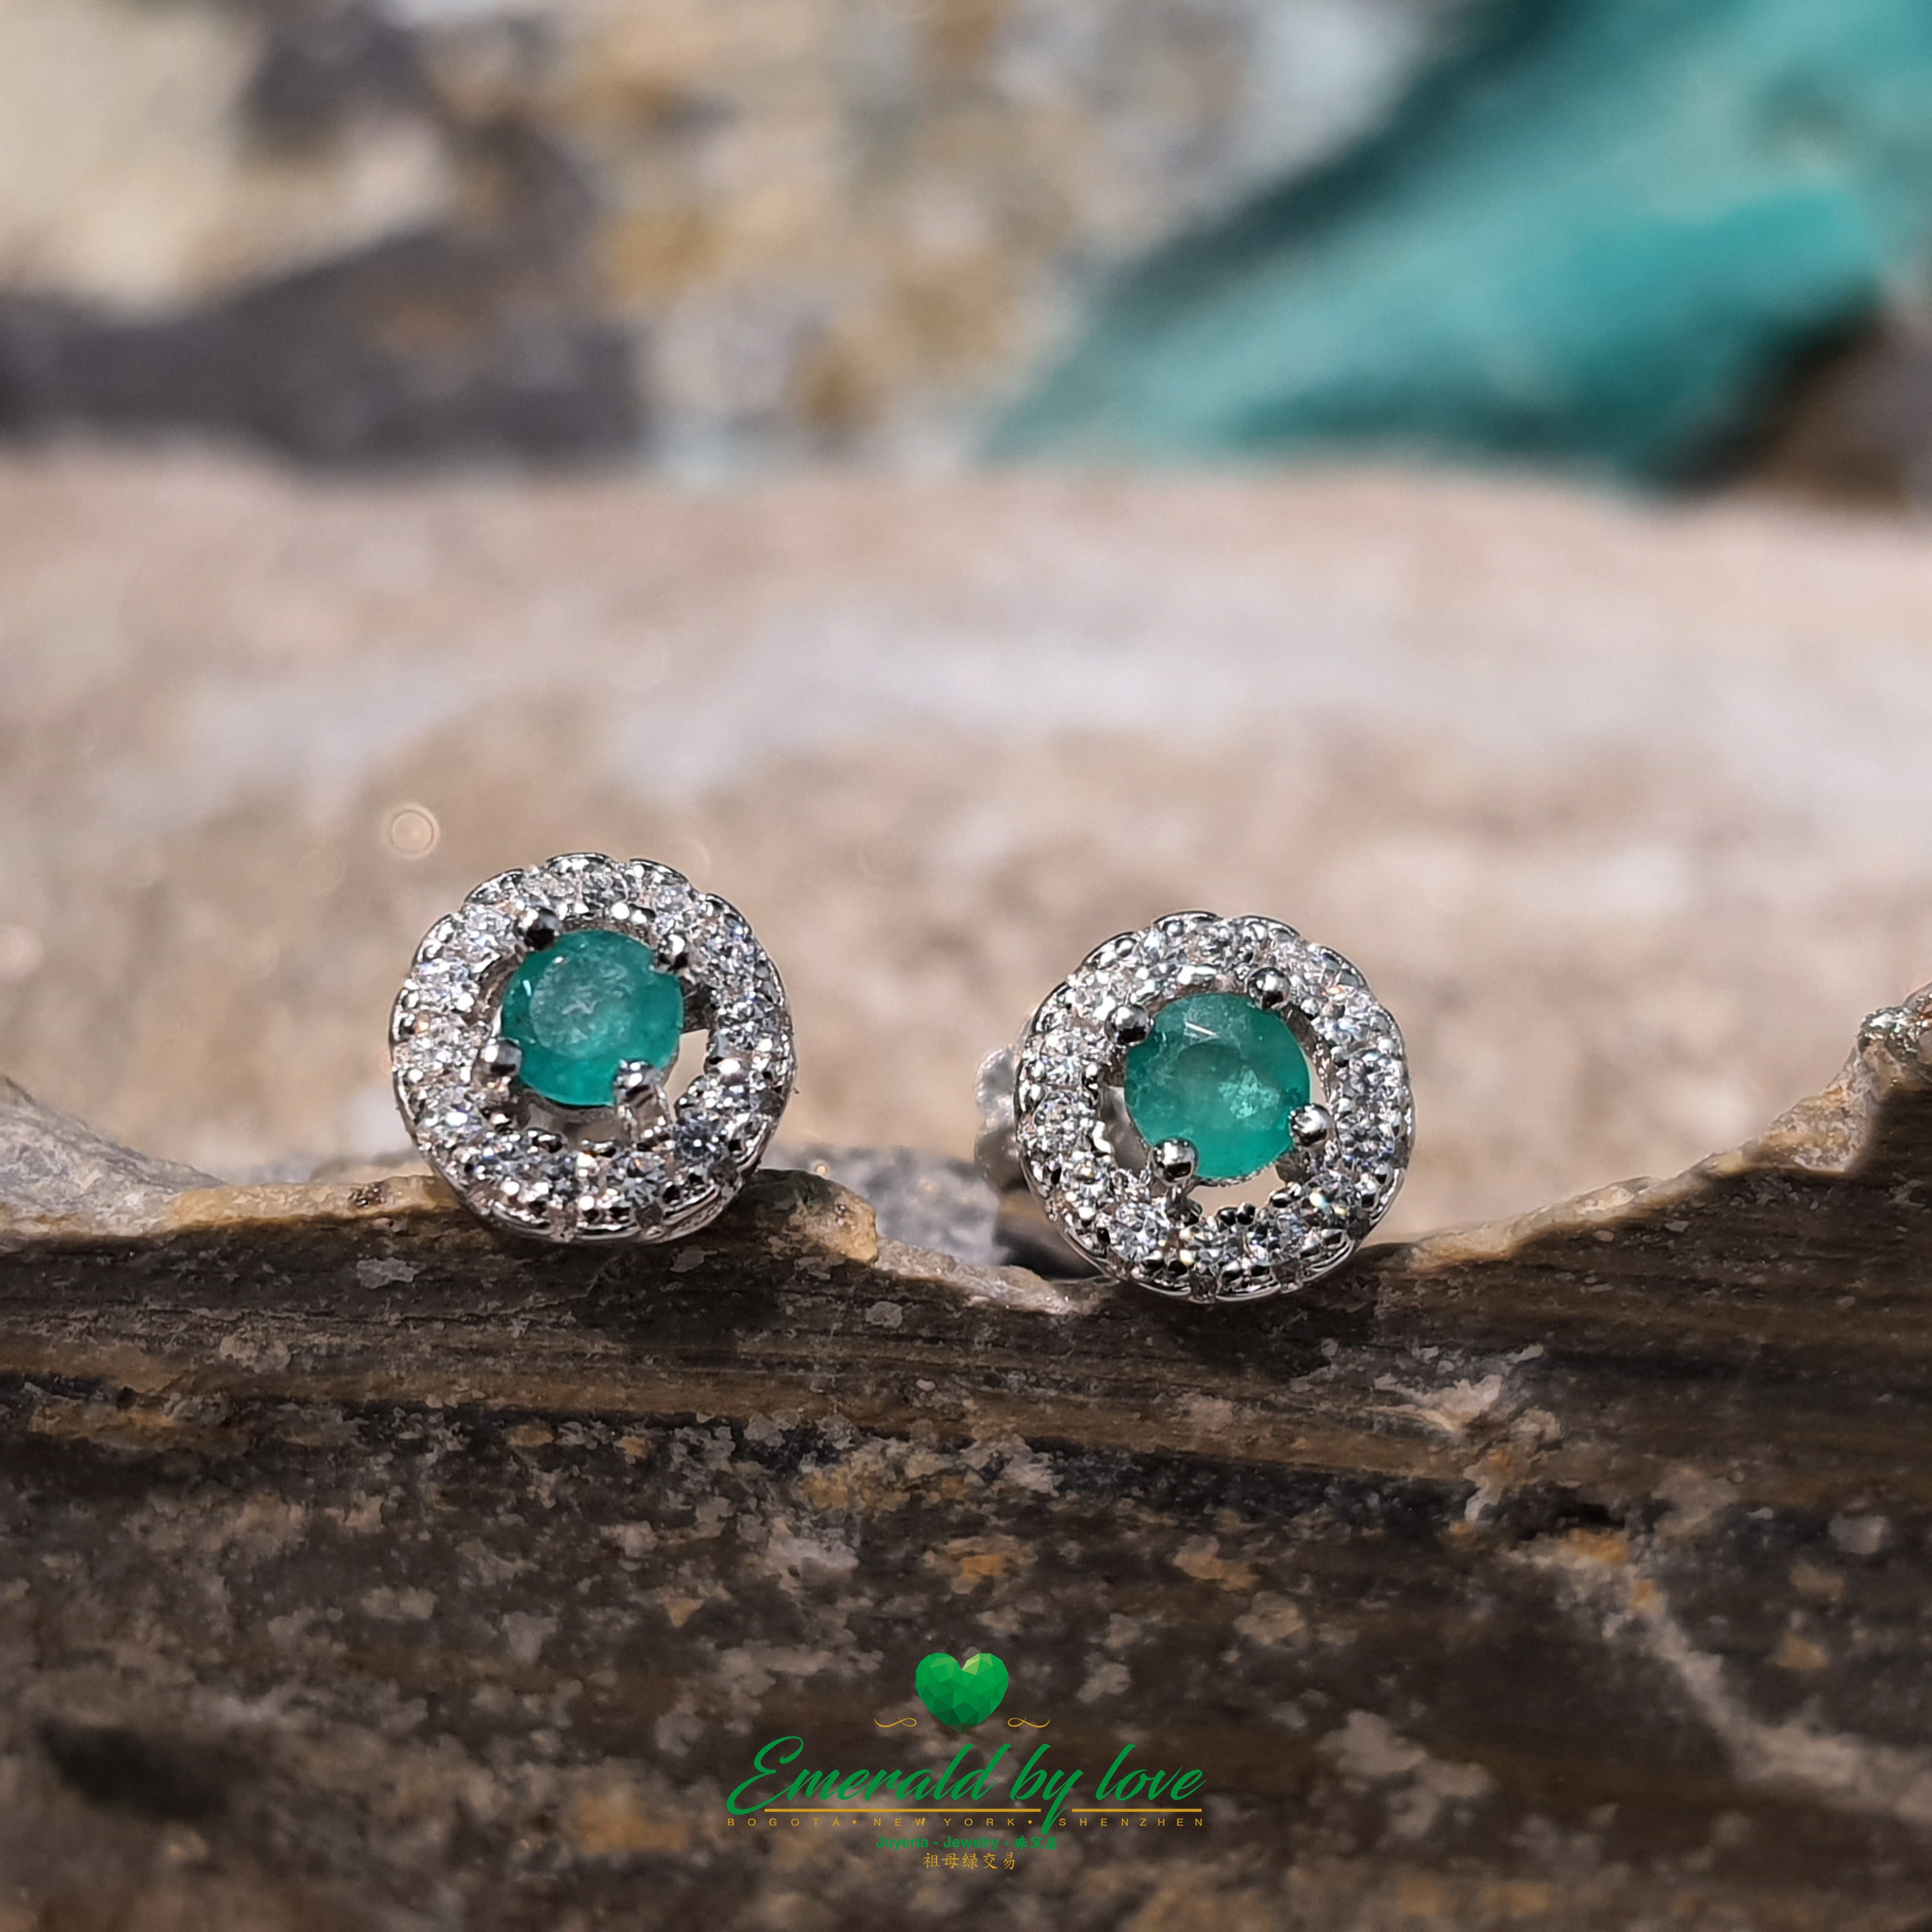 Small Round Marquise Sterling Silver Earrings with Central Emerald